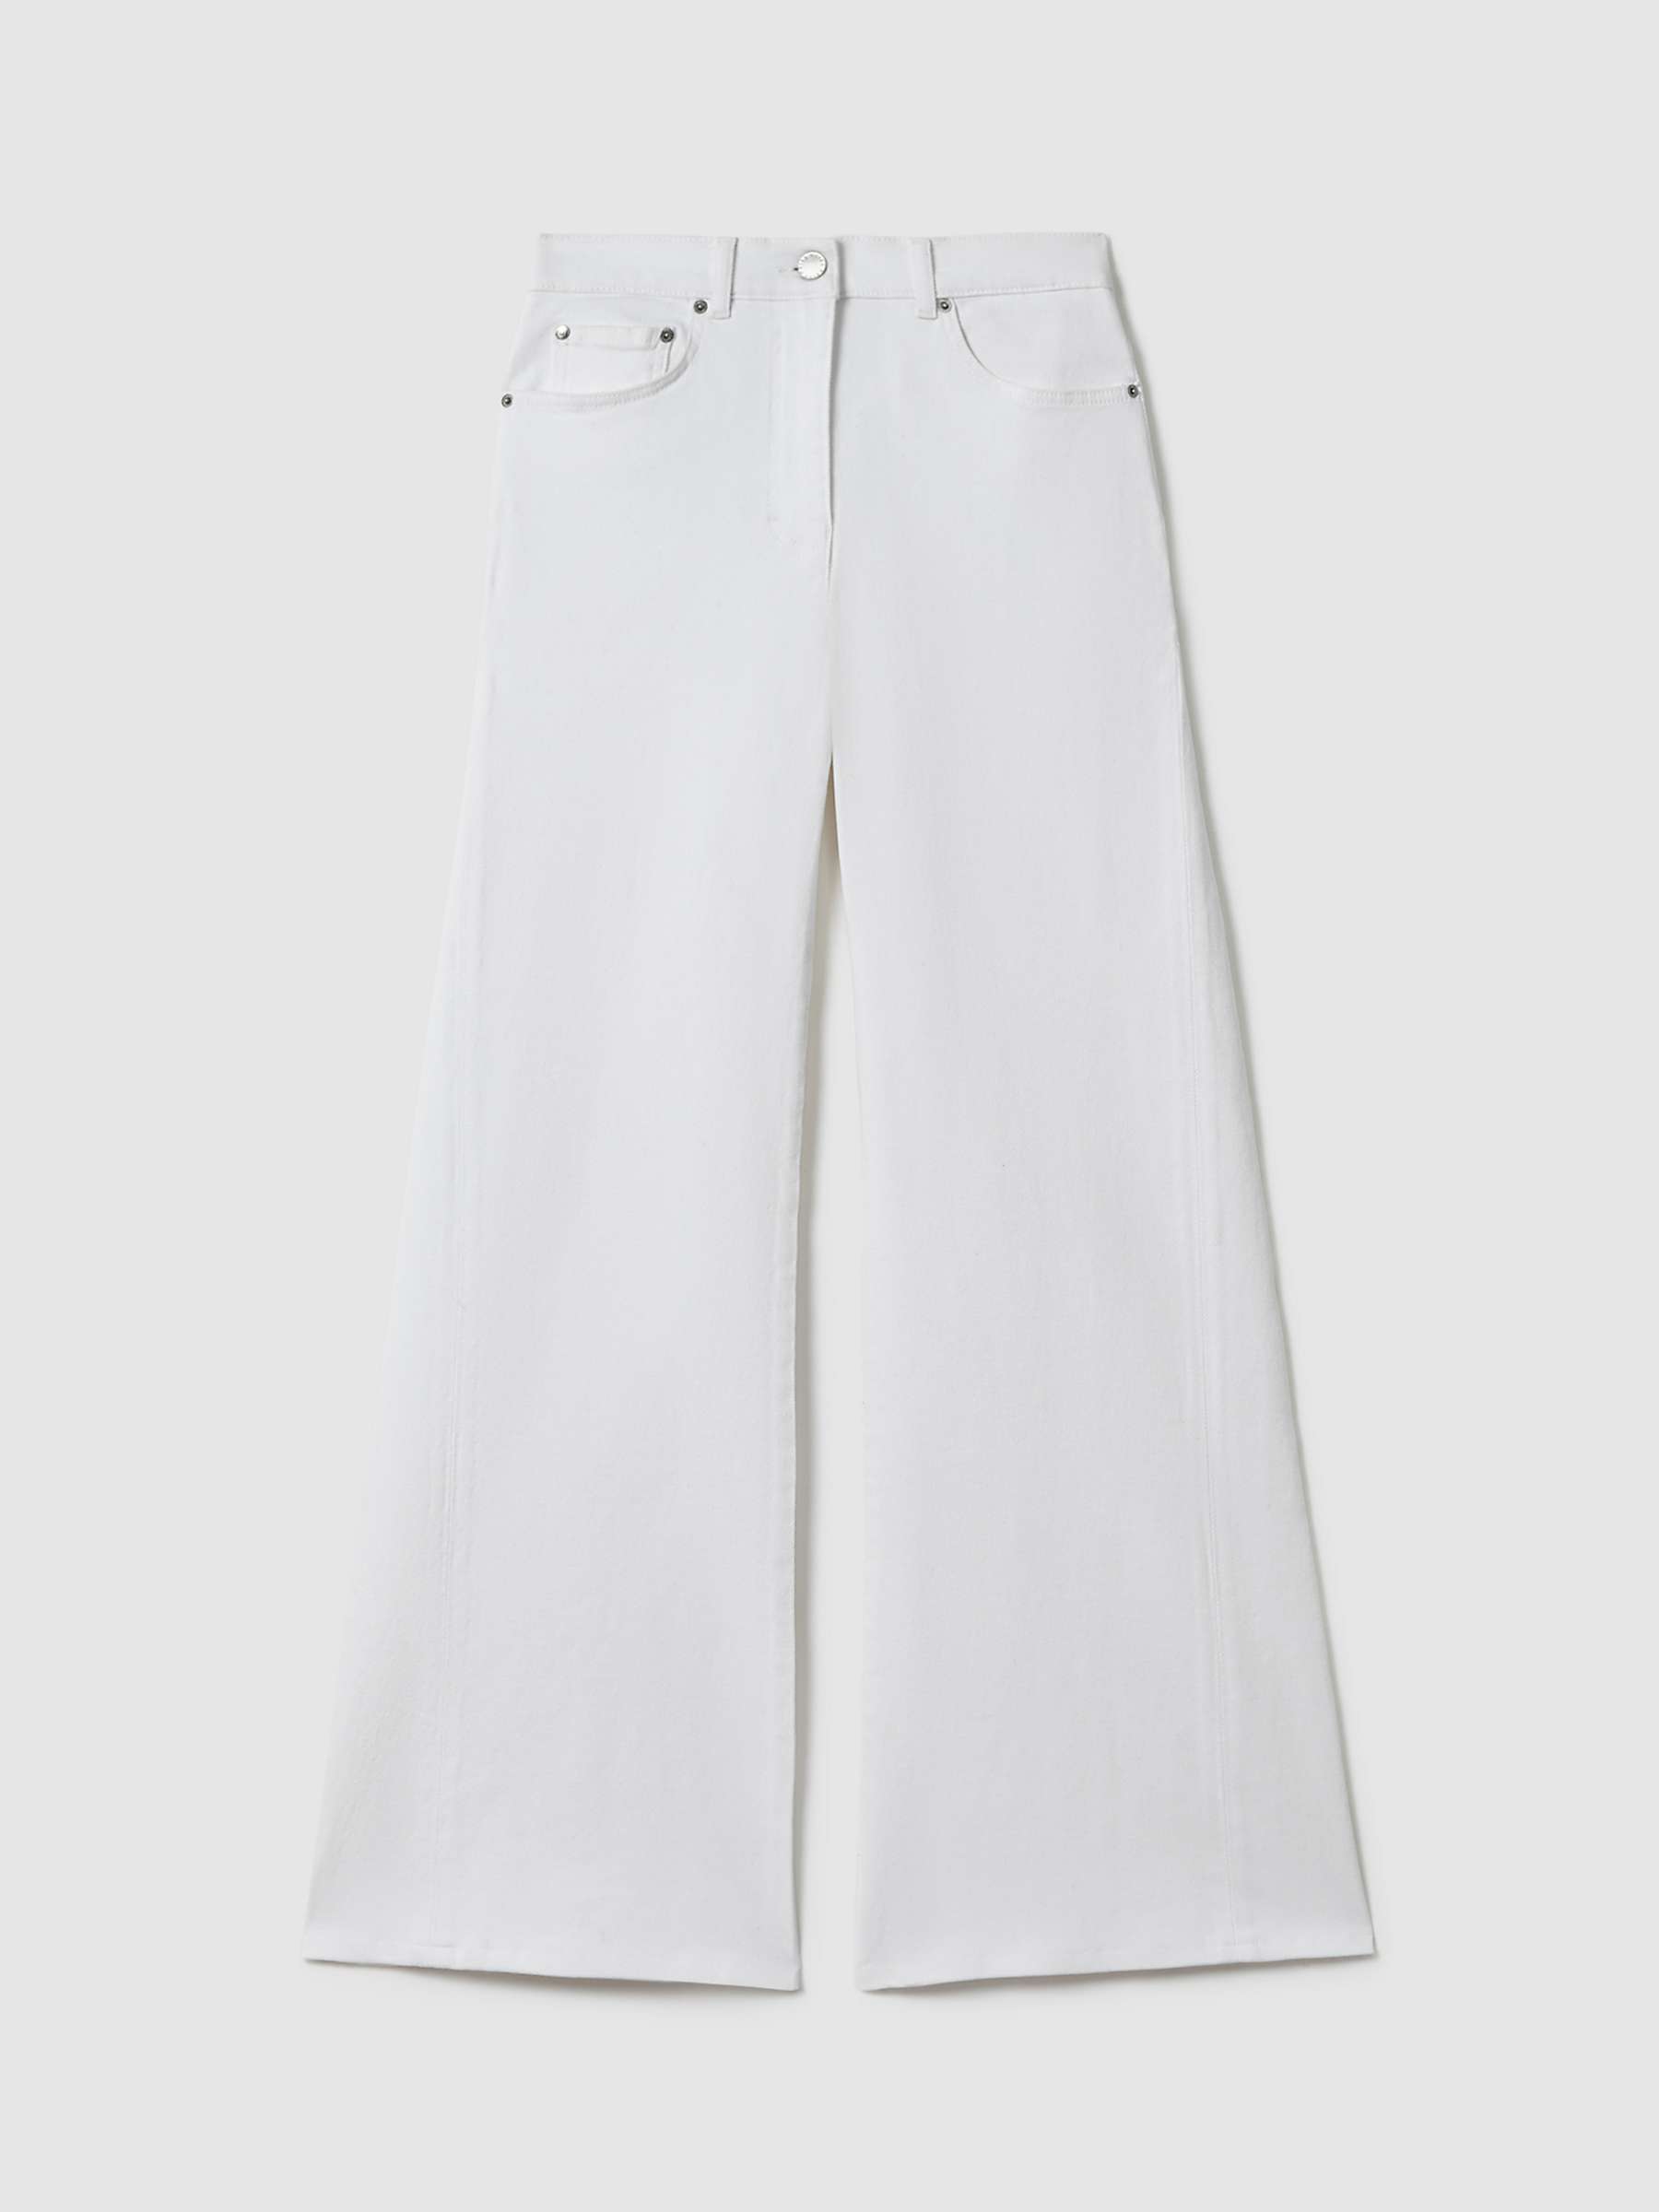 Buy Reiss Maize Wide Leg Jeans, White Online at johnlewis.com